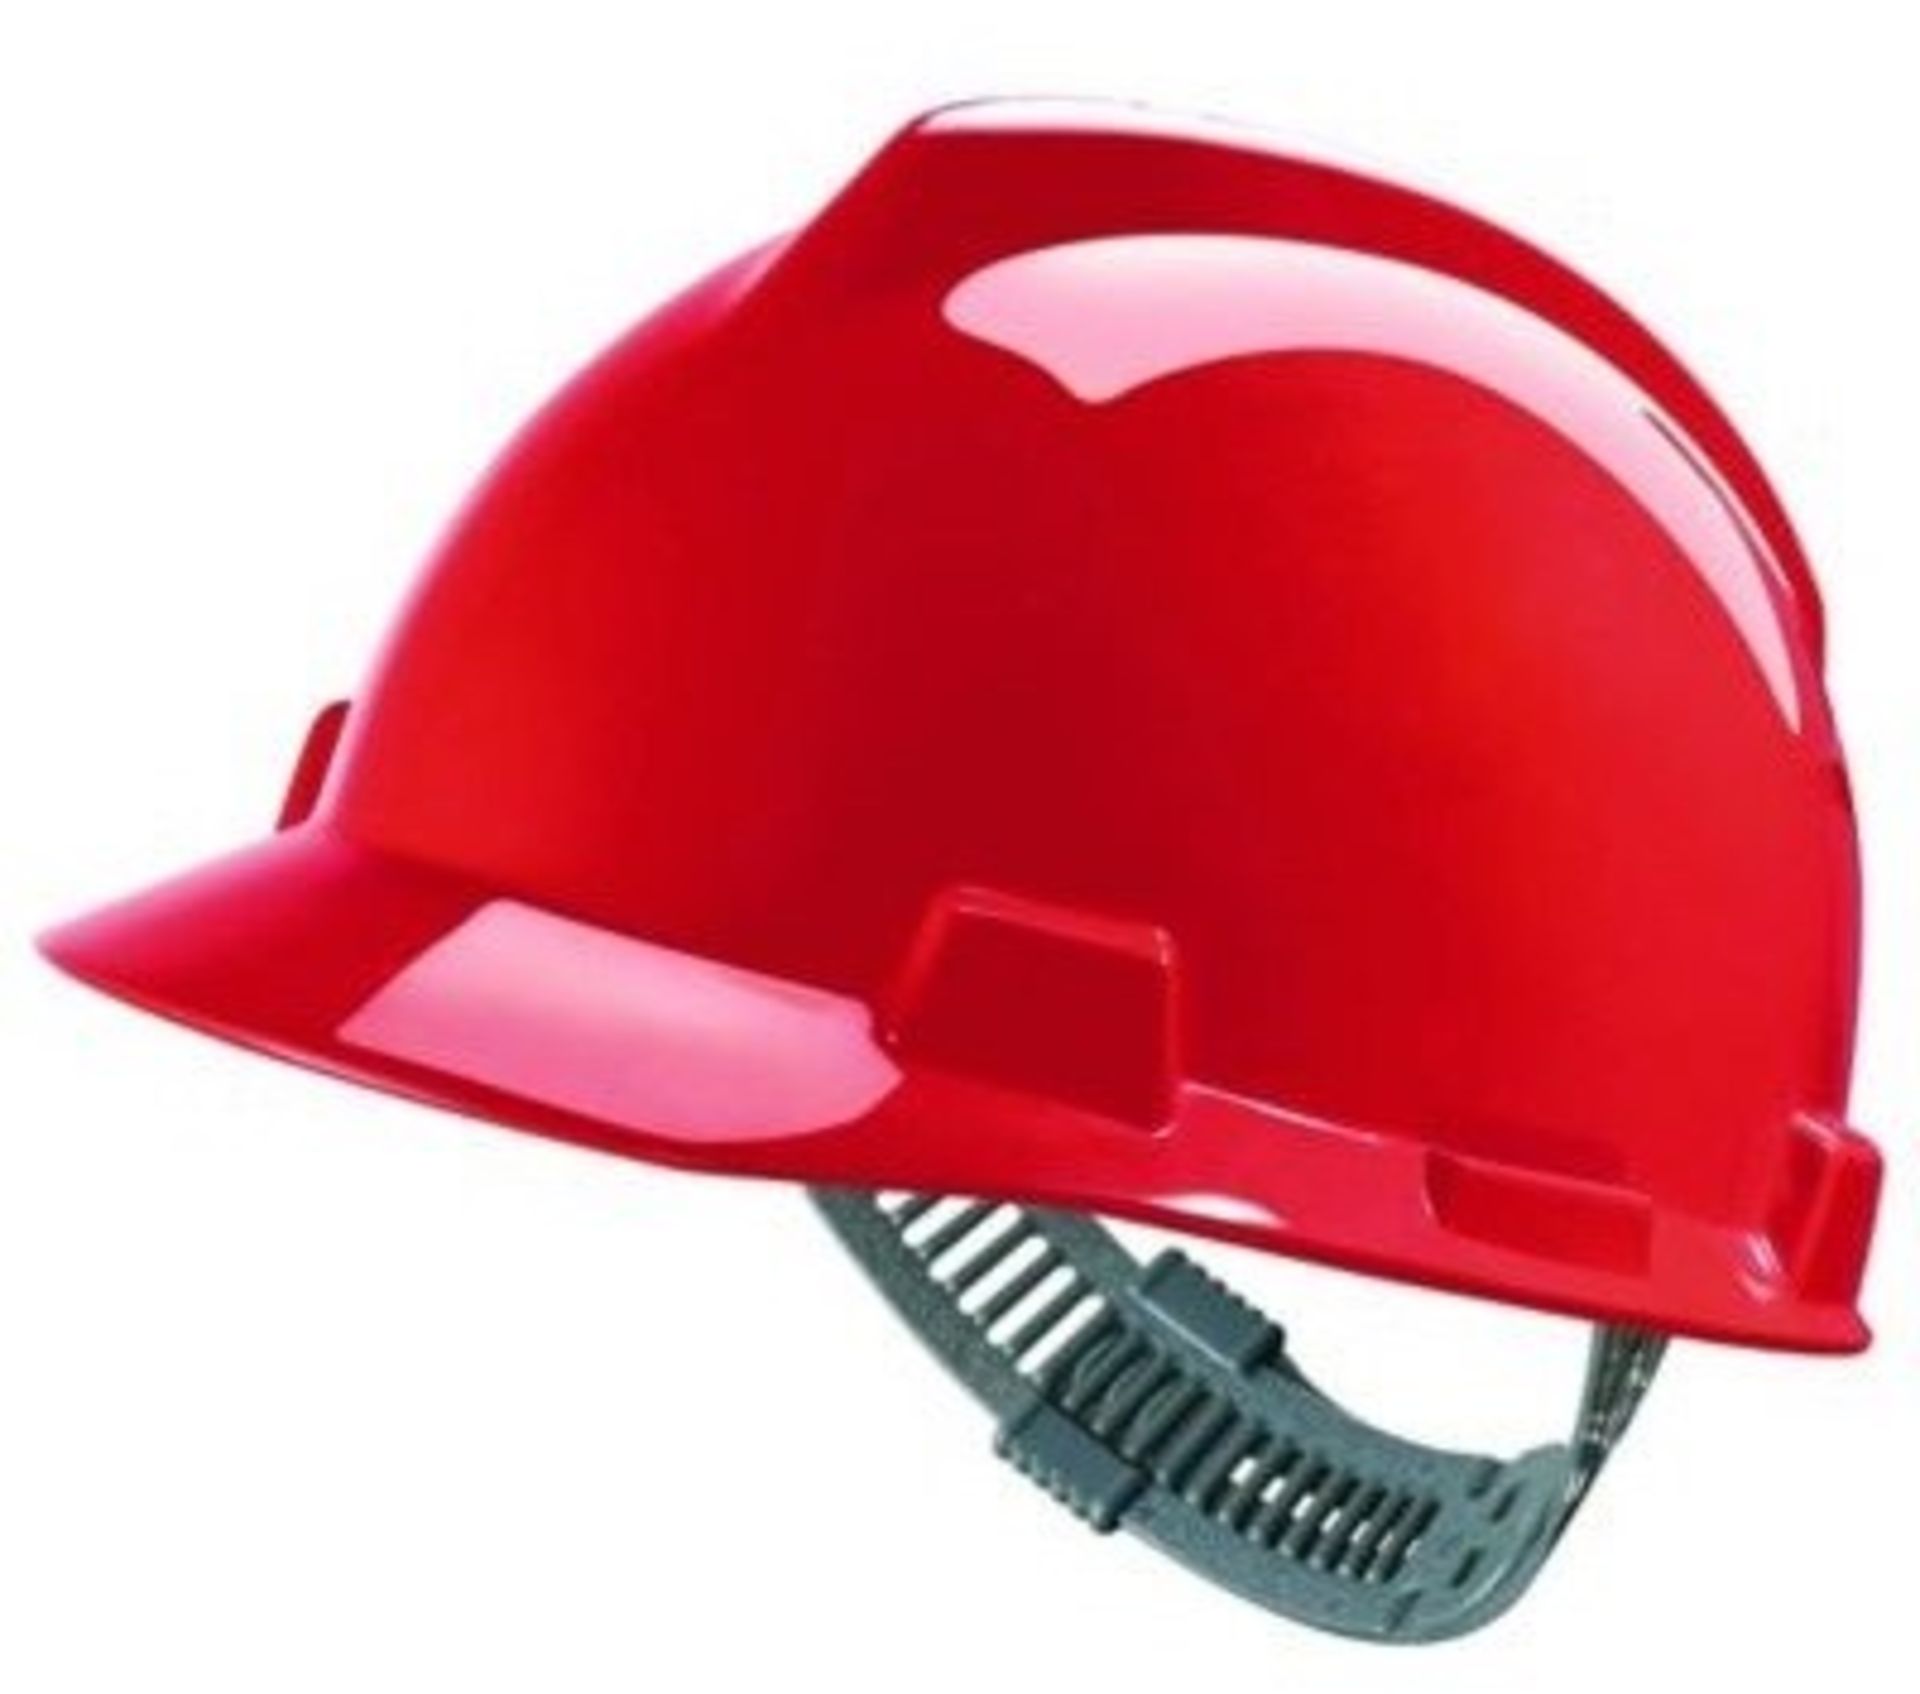 9 x V-Gard Protective Helmets With Staz-on Suspension And Sewn PVC Sweatband - Colour Red -